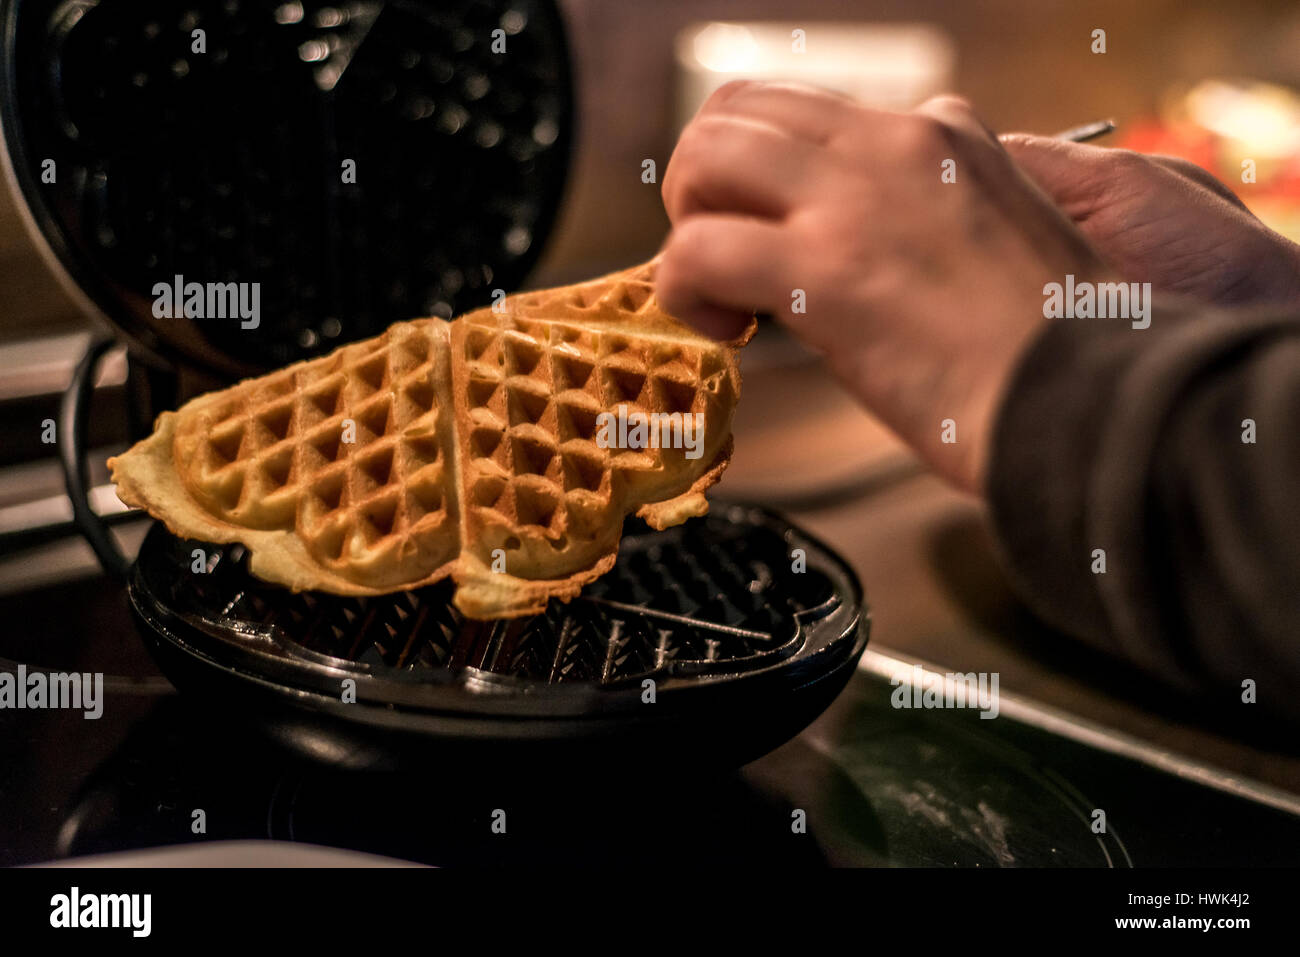 Homemade waffles are cooked in a waffle iron Stock Photo